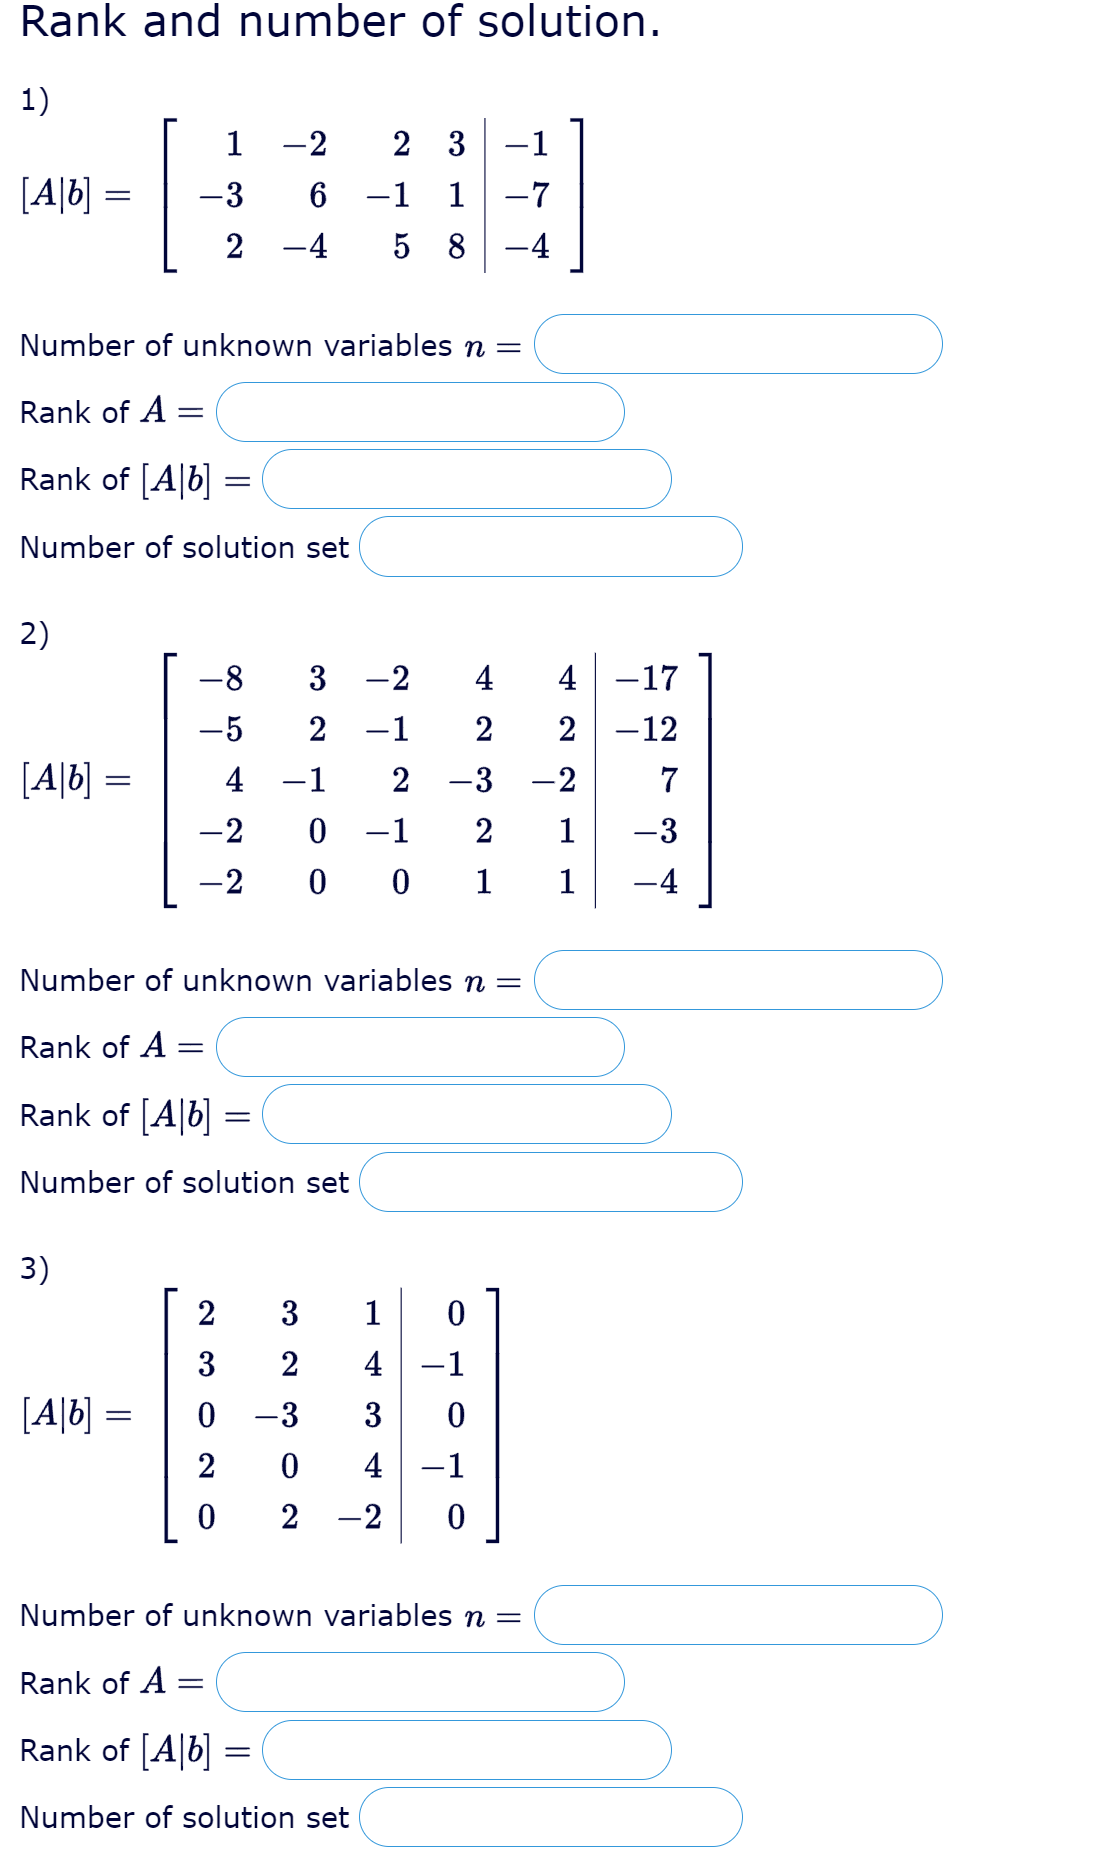 Rank and number of solution.
1)
1
-2
2 3
-1
[A|b] =
-3
-1
1
-7
2 -4
5 8-4
Number of unknown variables n =
Rank of A =
Rank of [A|b] =
Number of solution set
2)
-8
3
-2
4
4 -17
-5
-1
2
2 -12
[A|b] =
4
-1
-3
-2
7
-2
-1
2
1
-3
-2 0 0 1
1
-4
Number of unknown variables n =
Rank of A =
Rank of [A|b] =
Number of solution set
3)
1
3
2
4 -1
[A|b] =
0 -3
3
2
4 -1
2 -2
Number of unknown variables n =
Rank of A =
Rank of [A|b]
Number of solution set
2.
